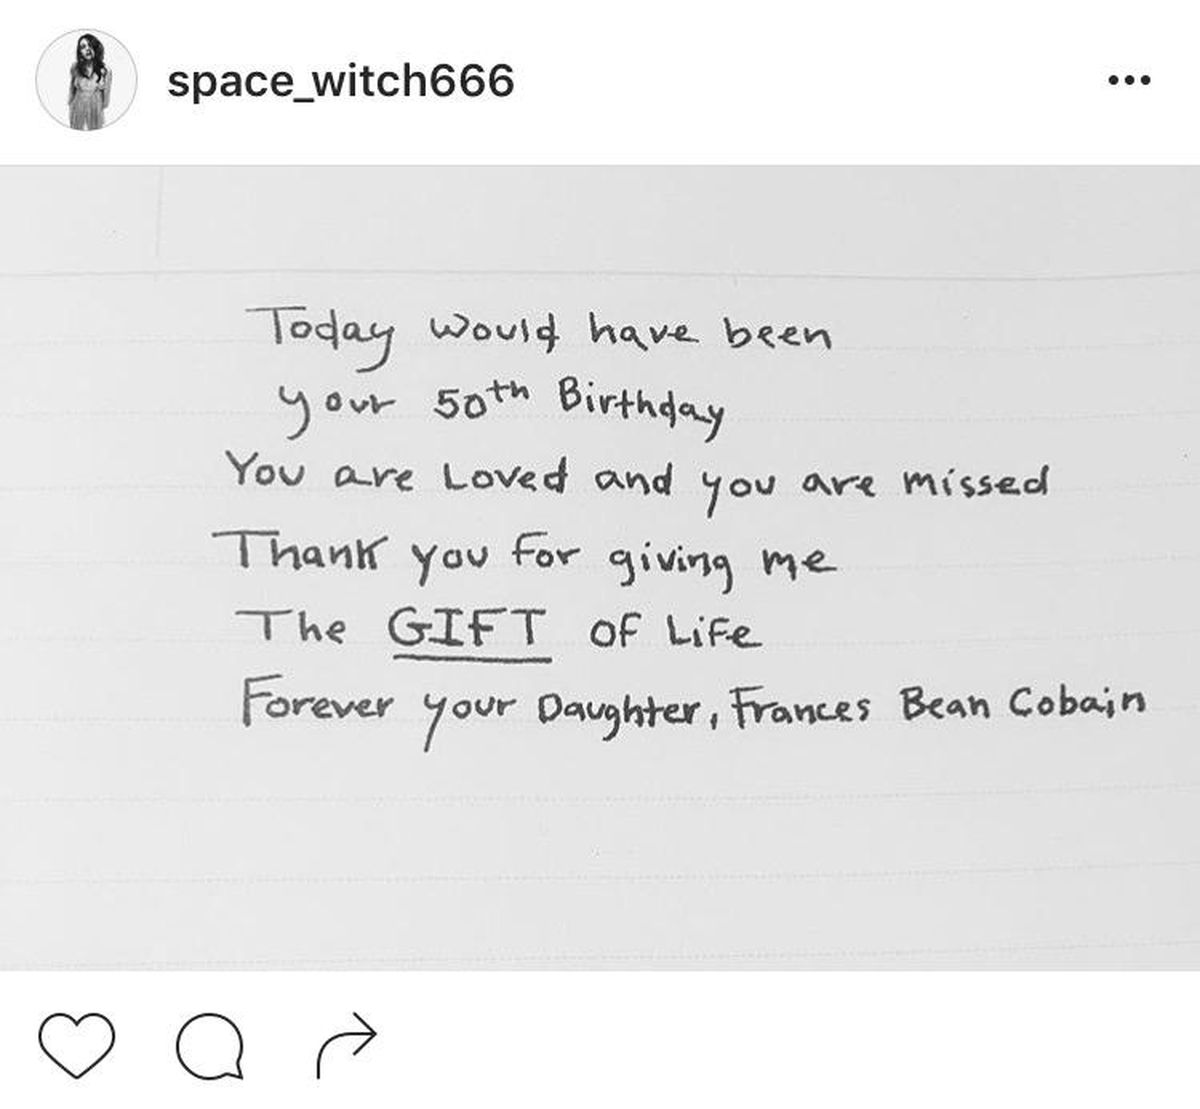 On Instagram Monday, Frances Bean Cobain posted a tribute to her late father, Nirvana frontman Kurt Cobain. Monday would have been his 50th birthday. He died in 1994 of a self-inflicted gunshot wound at age 27.